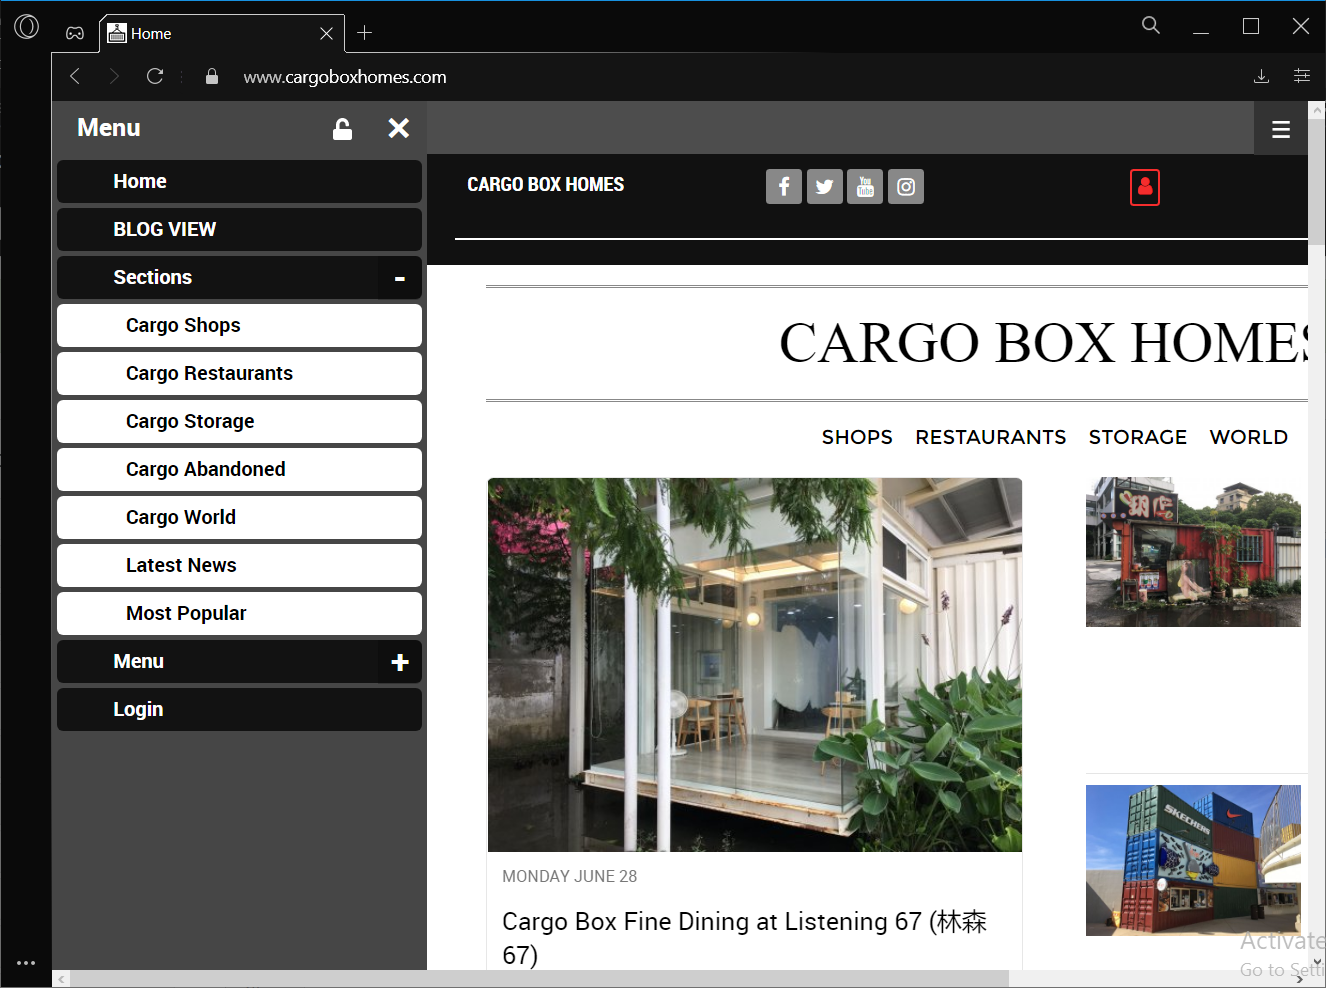 cargoboxhomes-website-10122021-version-03-2.png